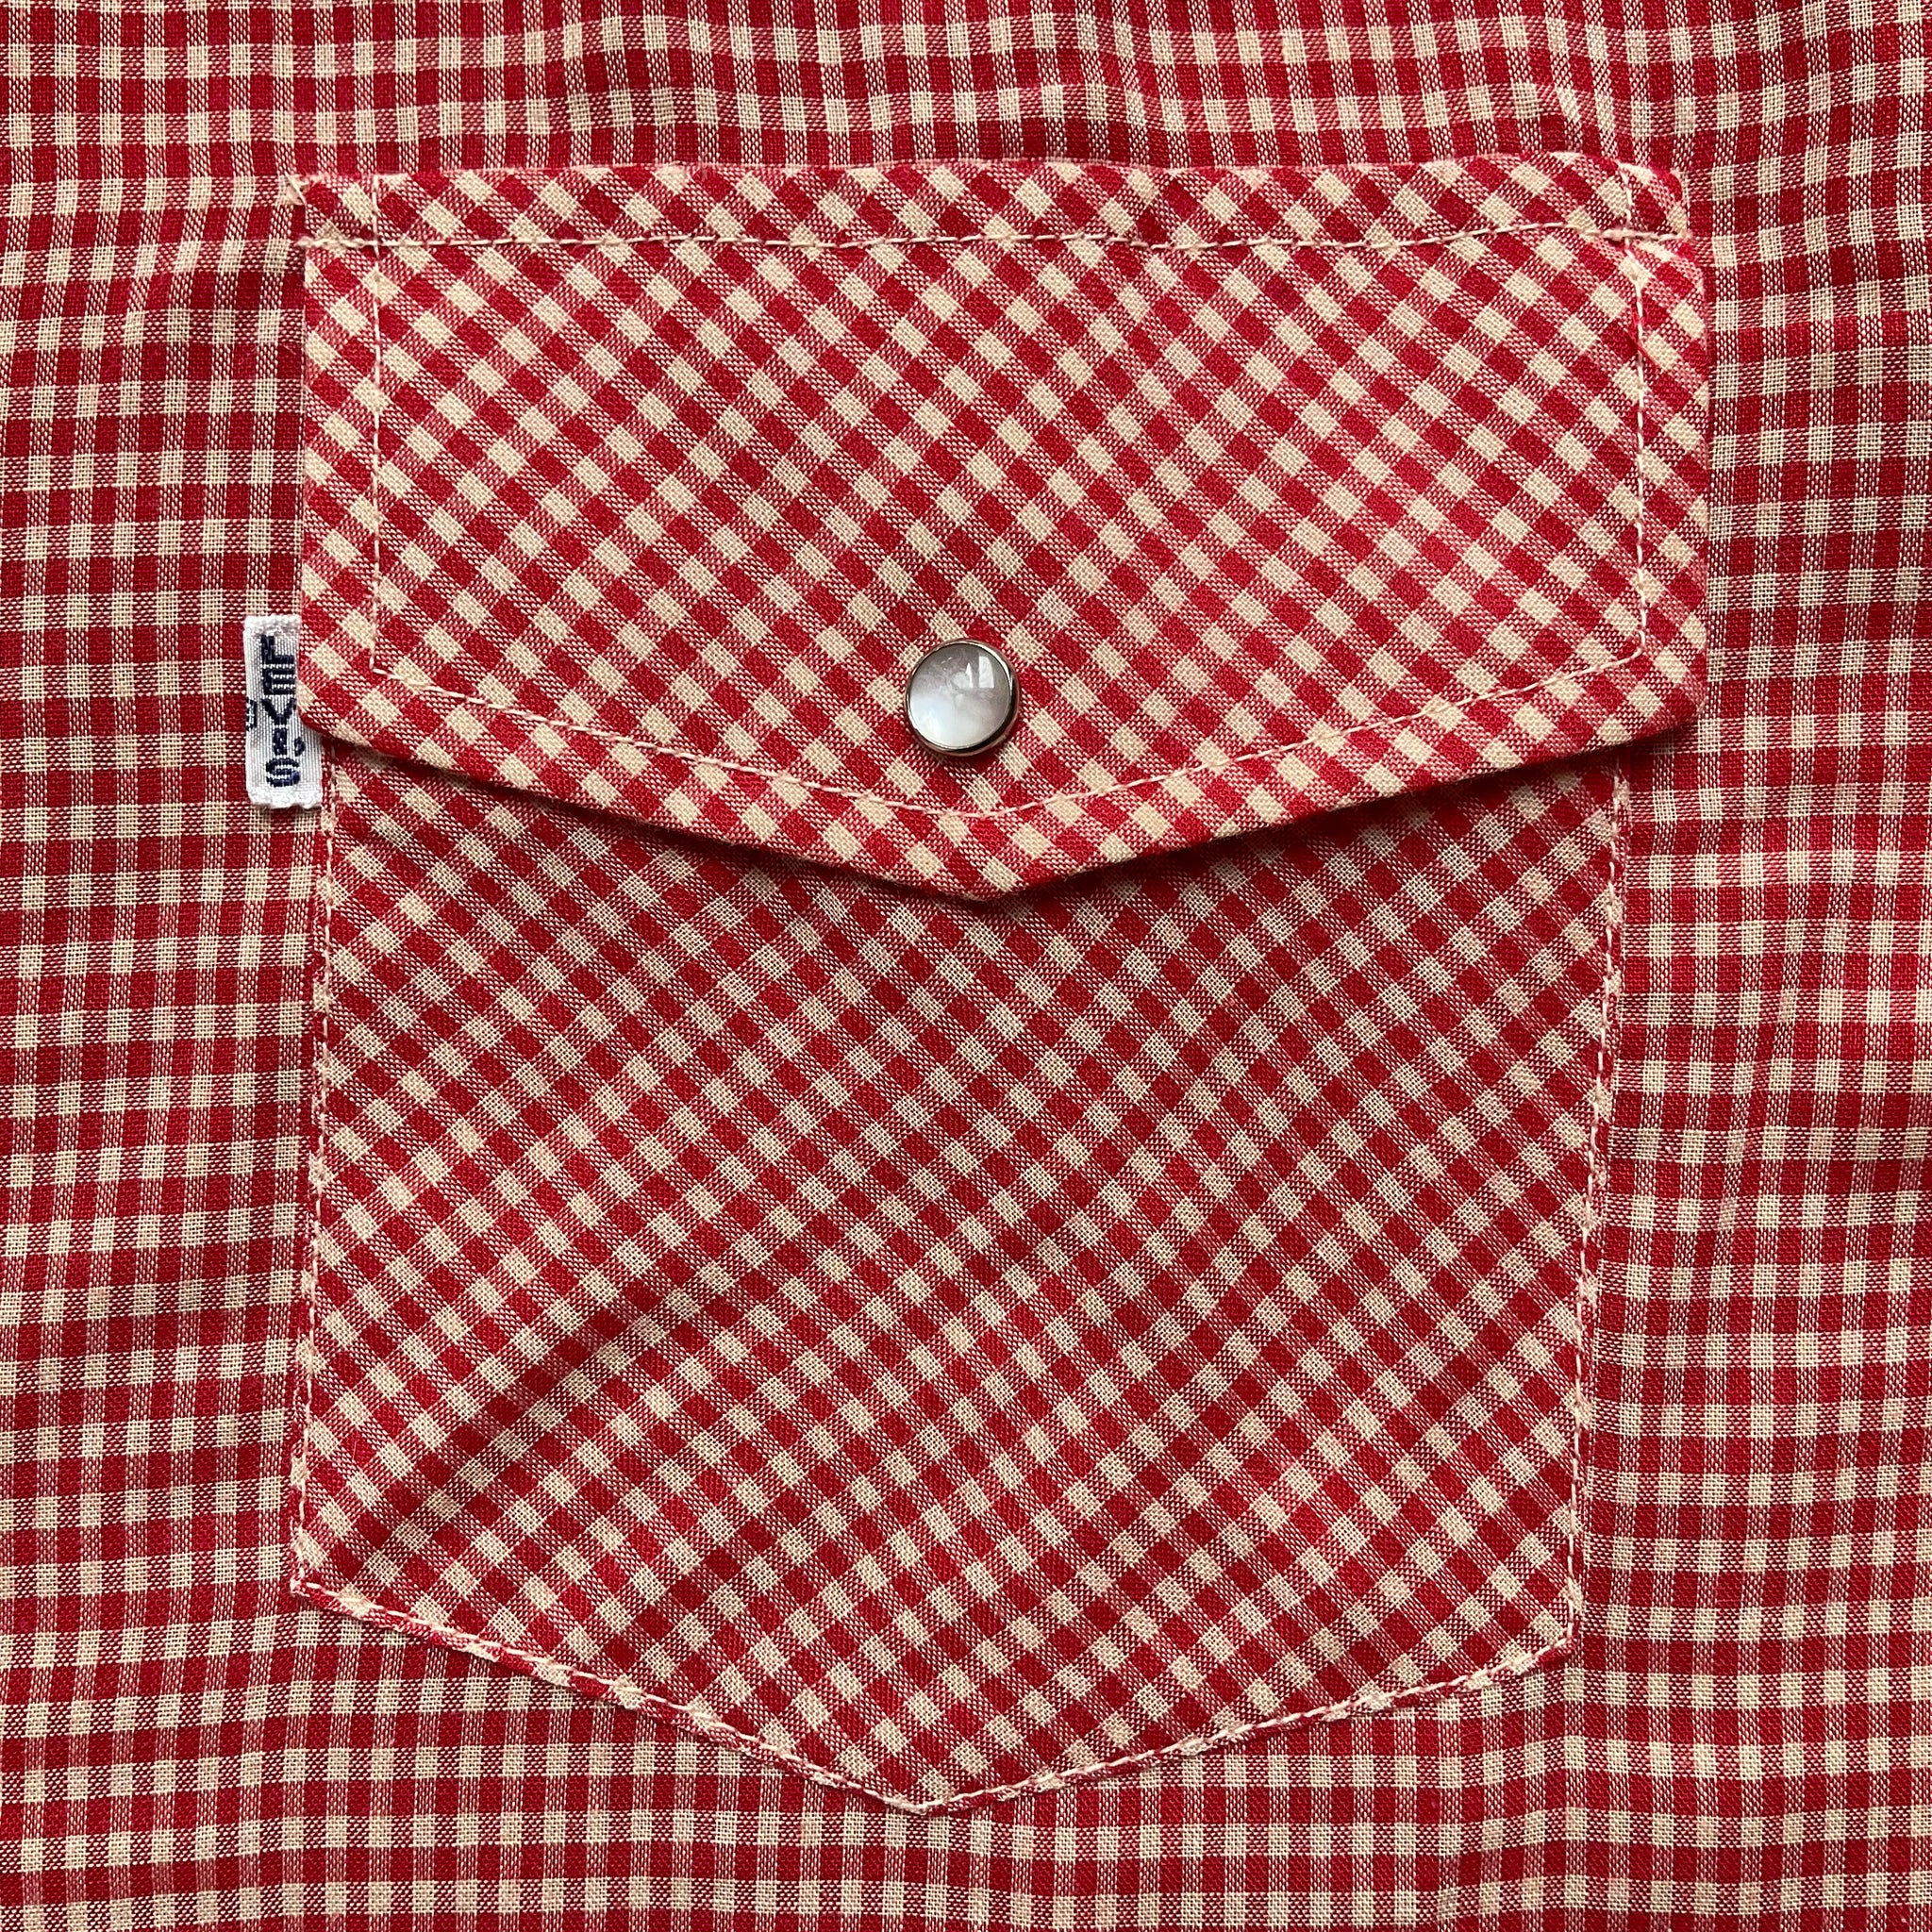 LEVI’S Vintage©️1978 BIG E Mens Western Shirt Red Check with Pearl Snaps by Levi’s Sportswear®️